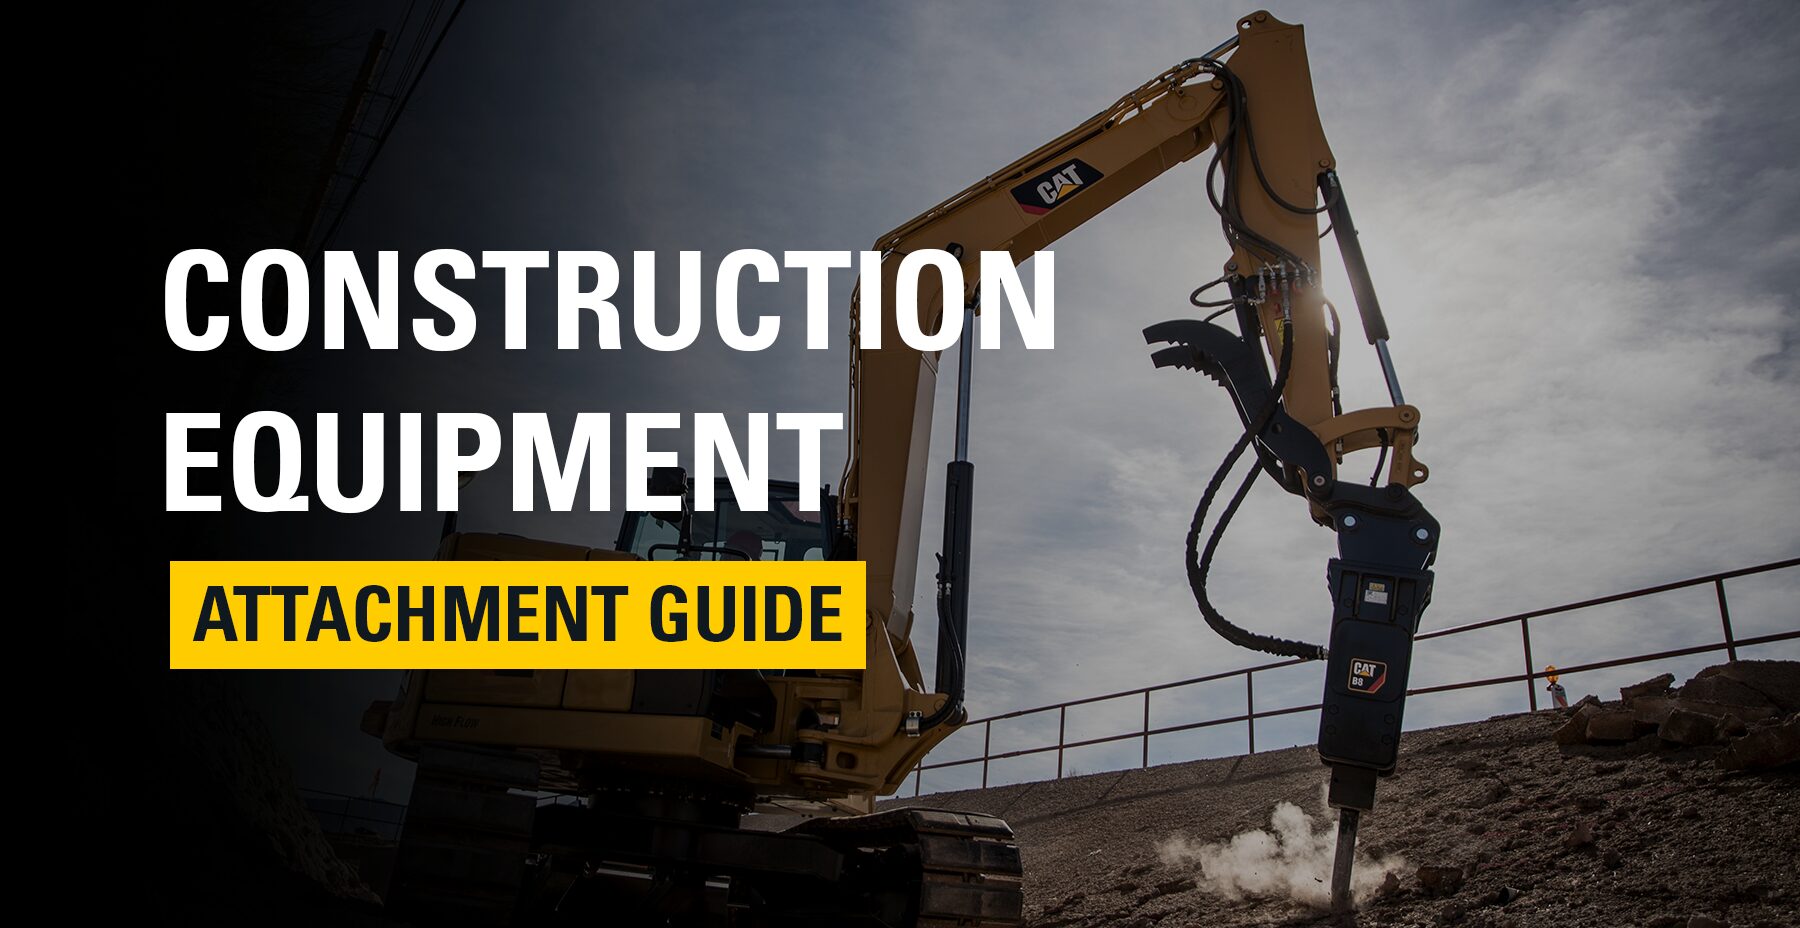 Construction Equipment Attachments Featured Image.